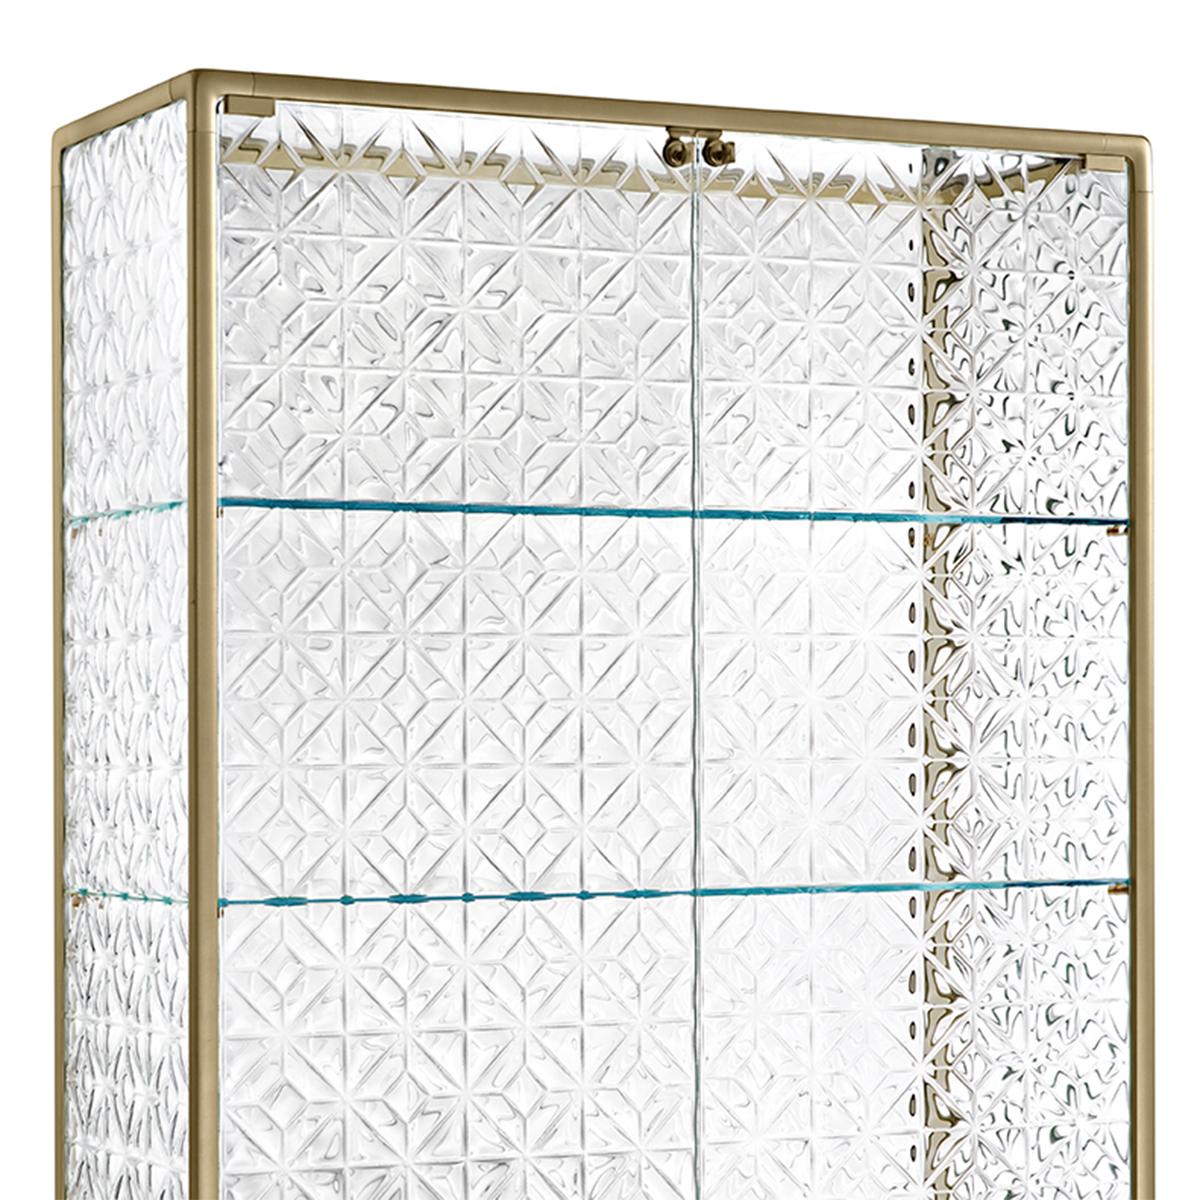 Glass Case Genova large with aluminum structure
in veneered brass finish. With fused carved clear glass
structure and doors, 6mm thickness. Inside tempered 
glass shelves in 8mm thickness. Each shelf can support 
20 kilos. Base in tempered